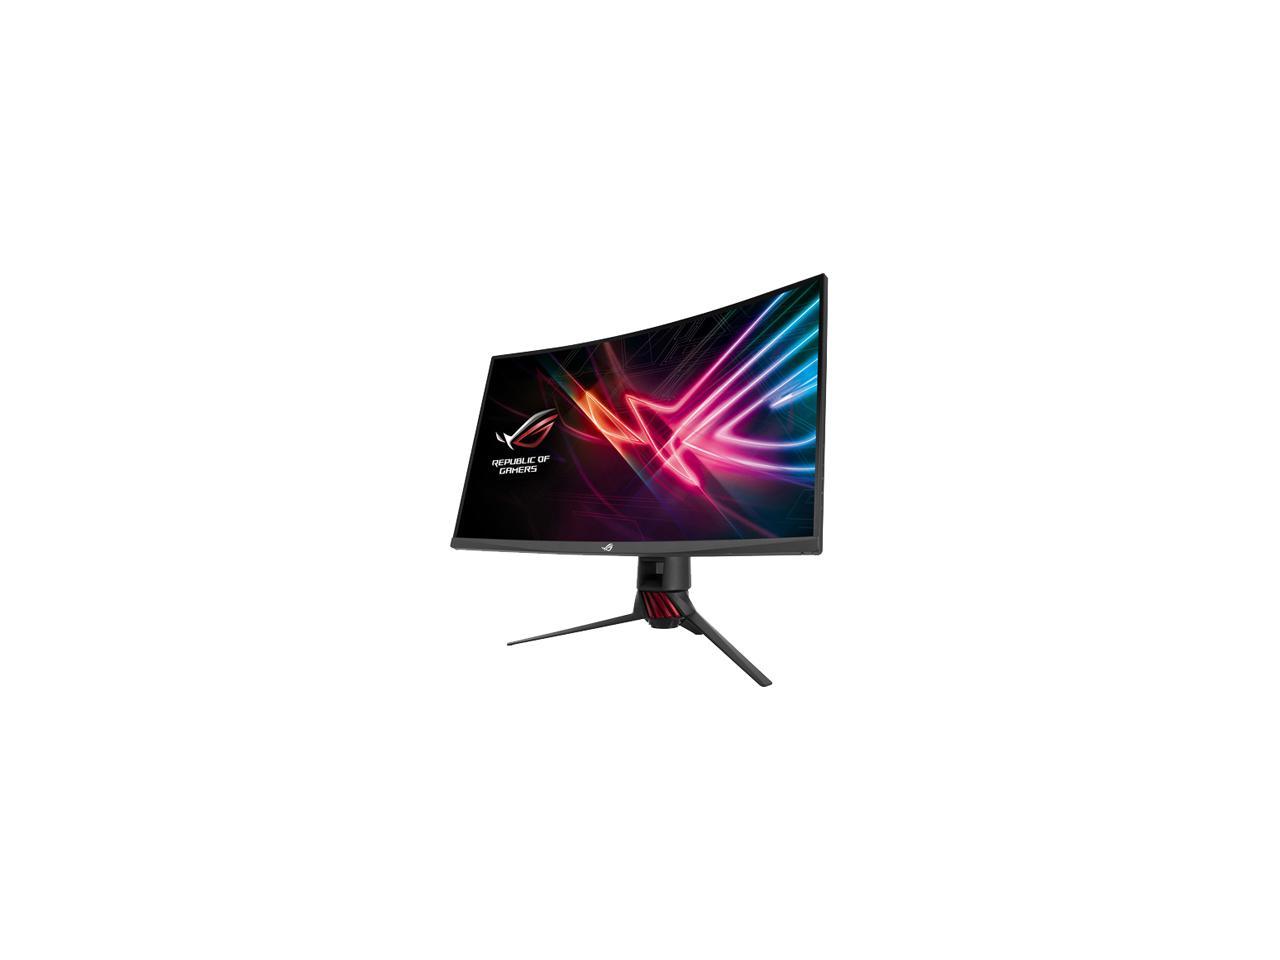 ASUS ROG Strix XG32VQ 32" (Actual size 31.5") WQHD 2560 x 1440 2K Adaptive/FreeSync 144Hz 4ms Curved Gaming Monitors with Aura RGB Lighting Asus Eye Care with Ultra Low-Blue Light & Flicker-Free